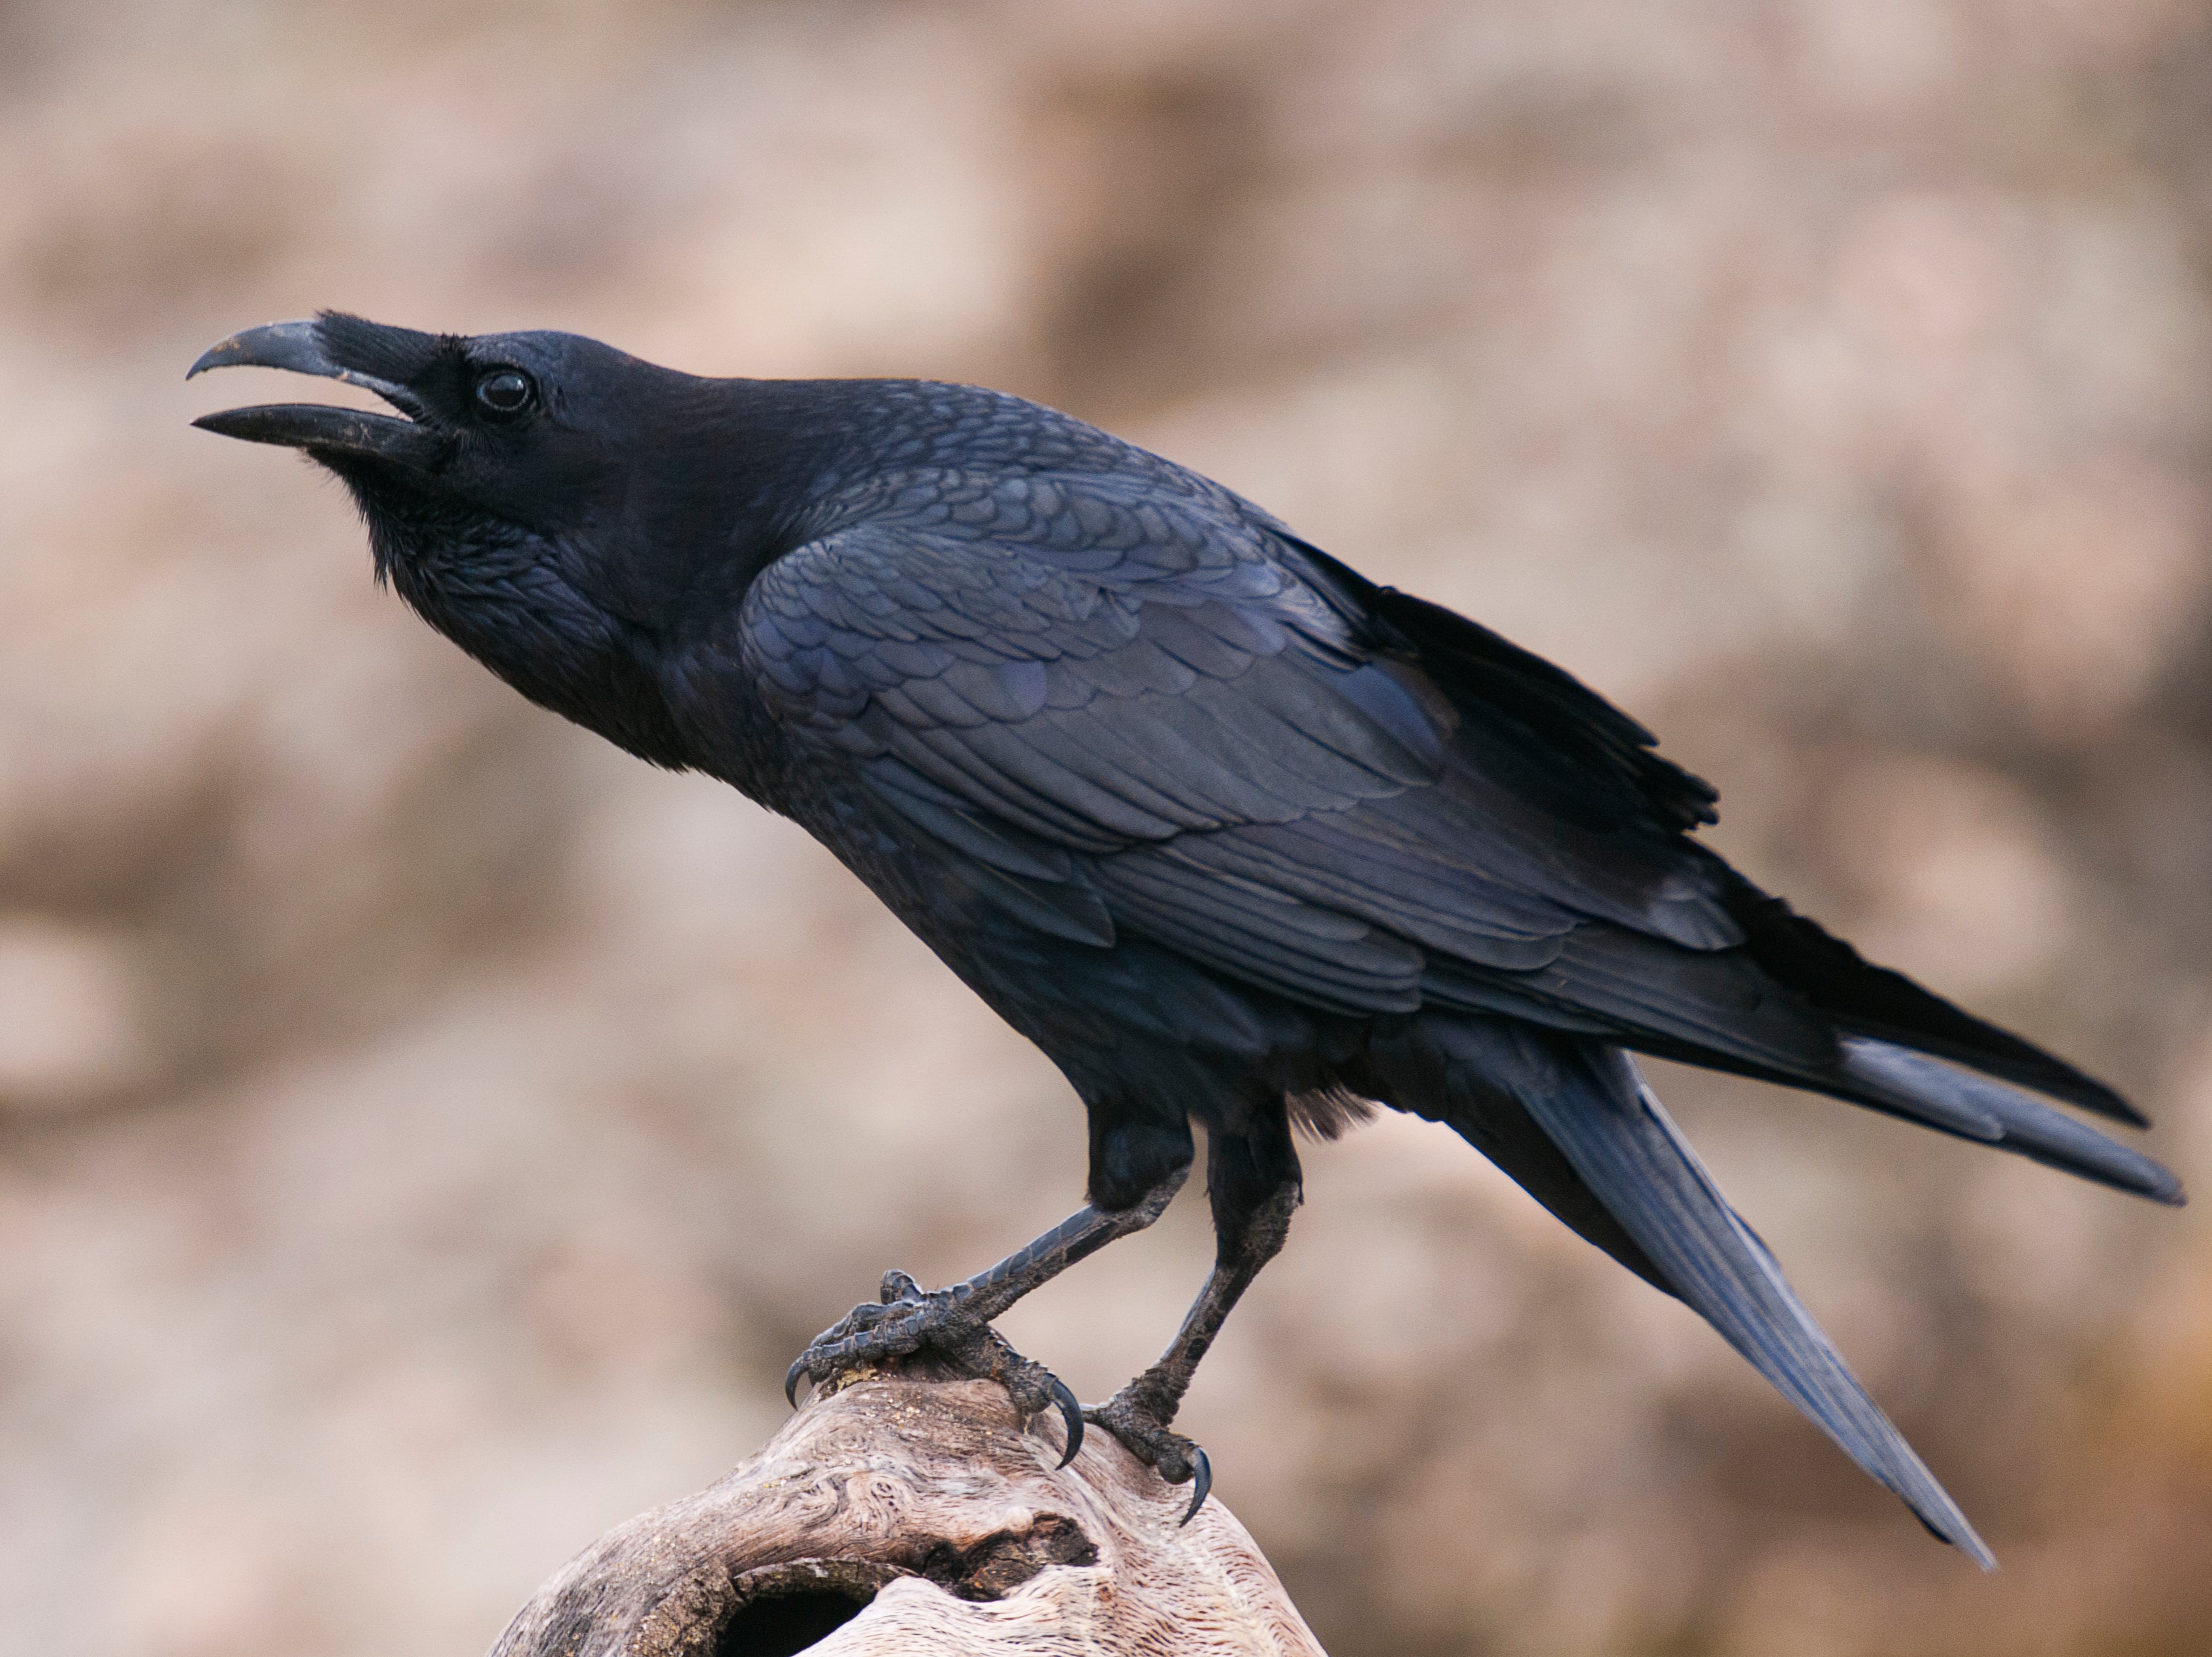 Ravens [pictured] and crows are highly competent fliers with large brain sizes in proportion to their bodies, giving them an edge over other species